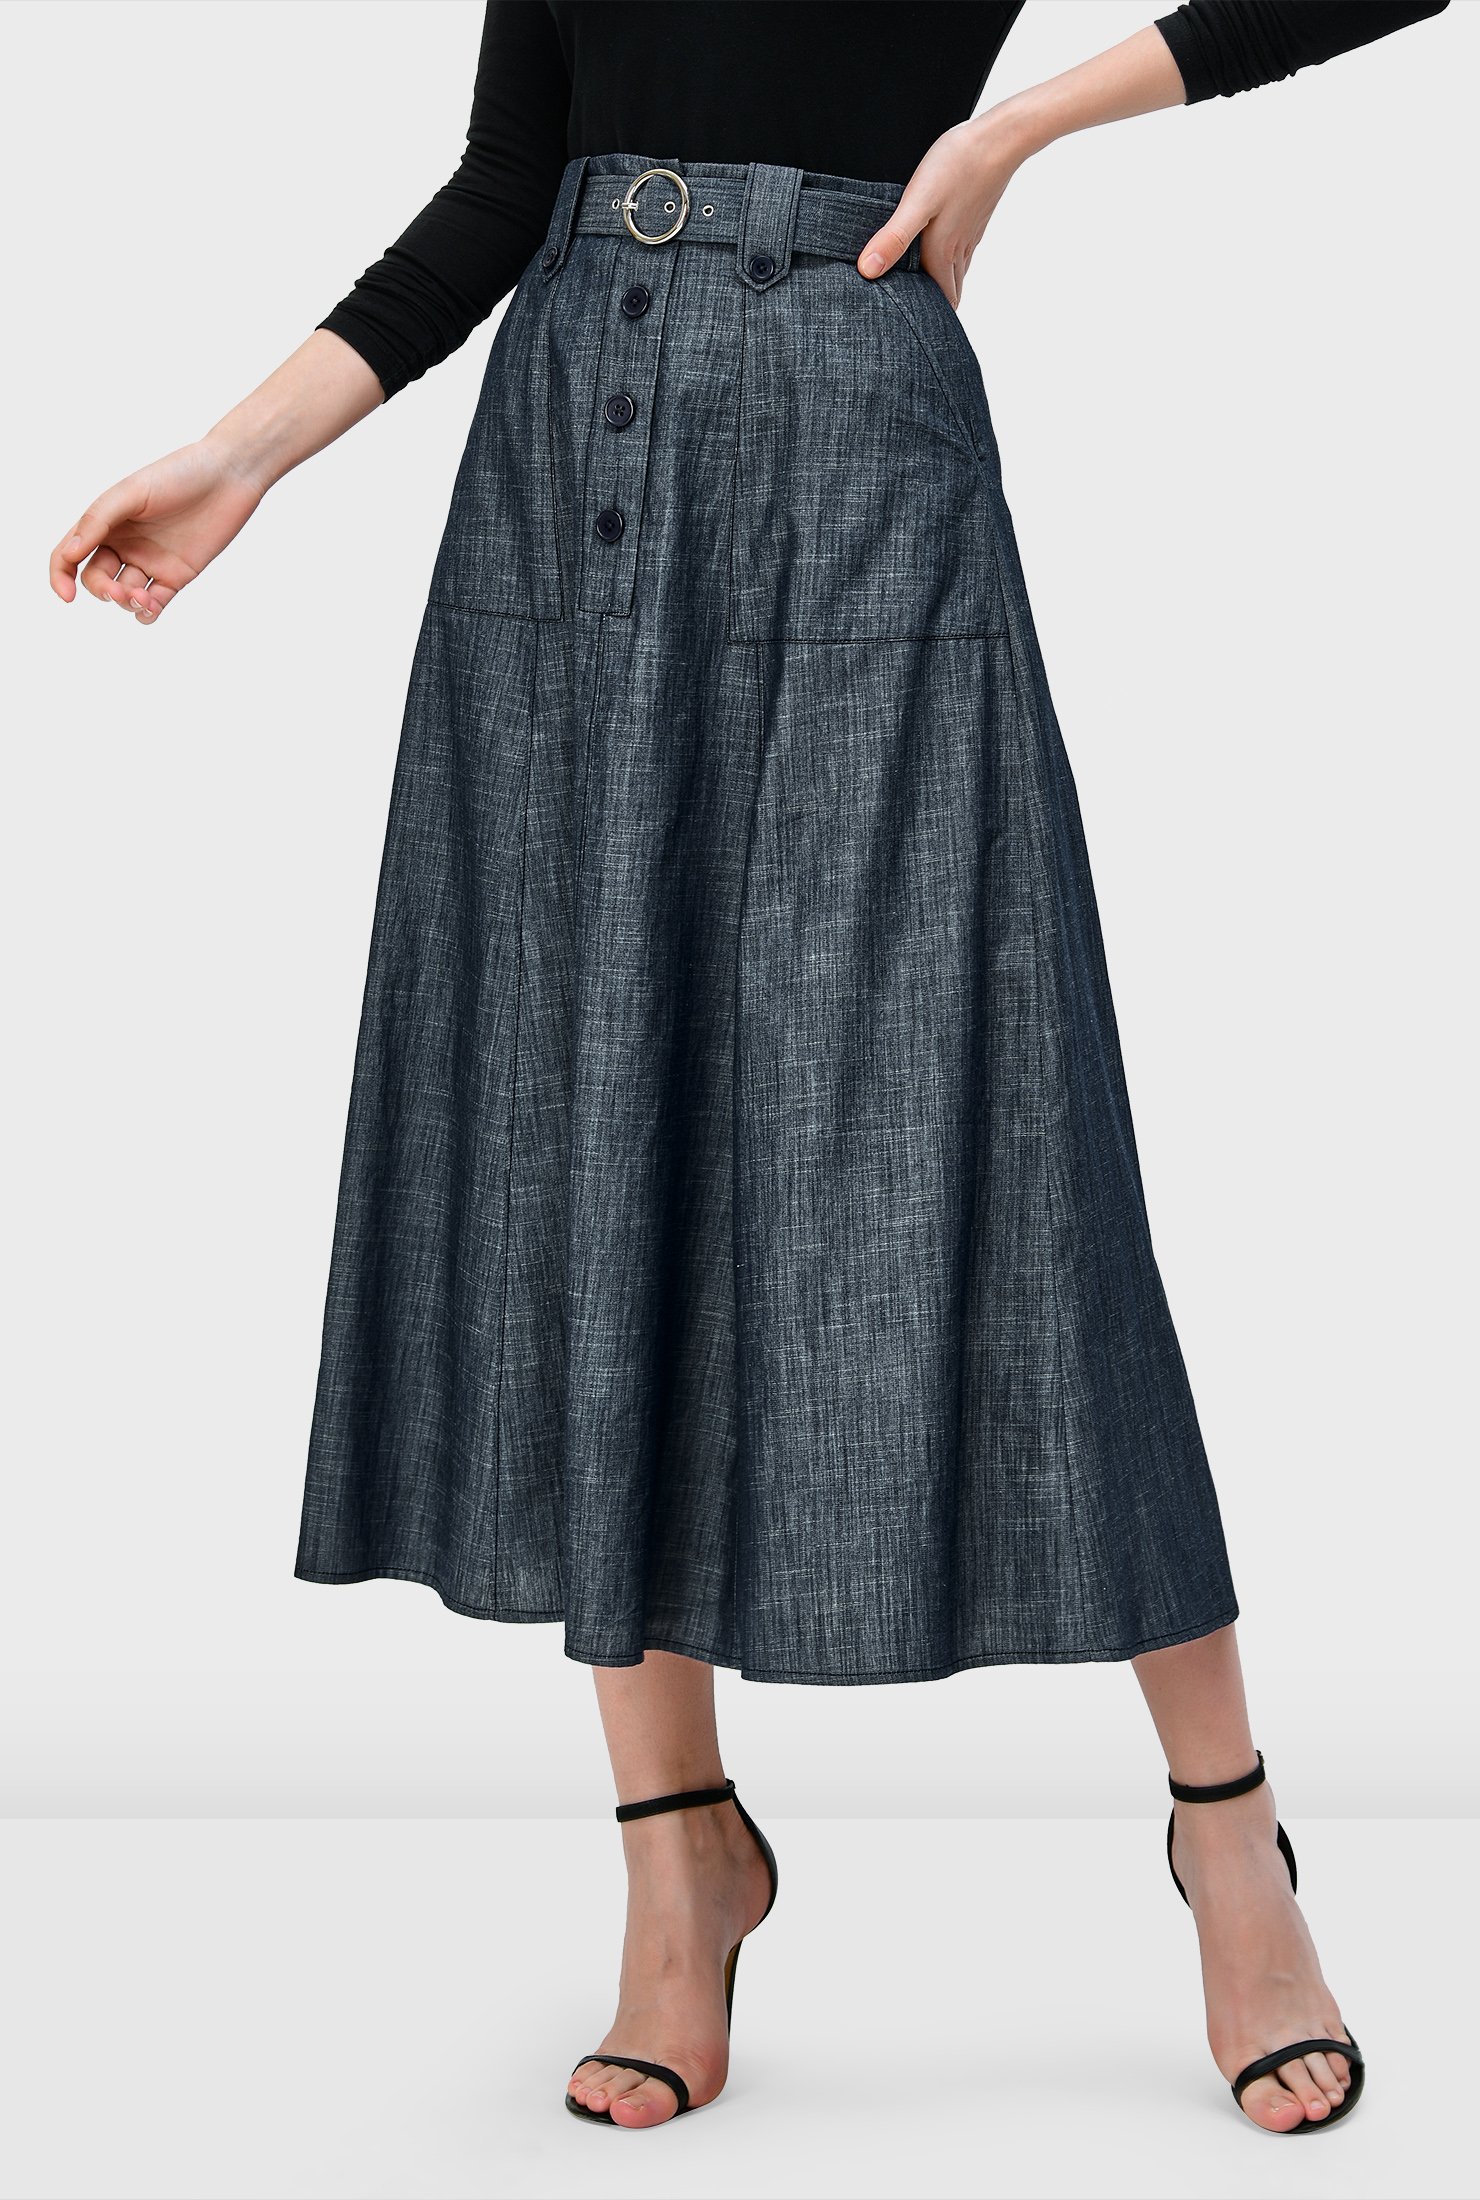 chambray chill. – Skirt The Rules